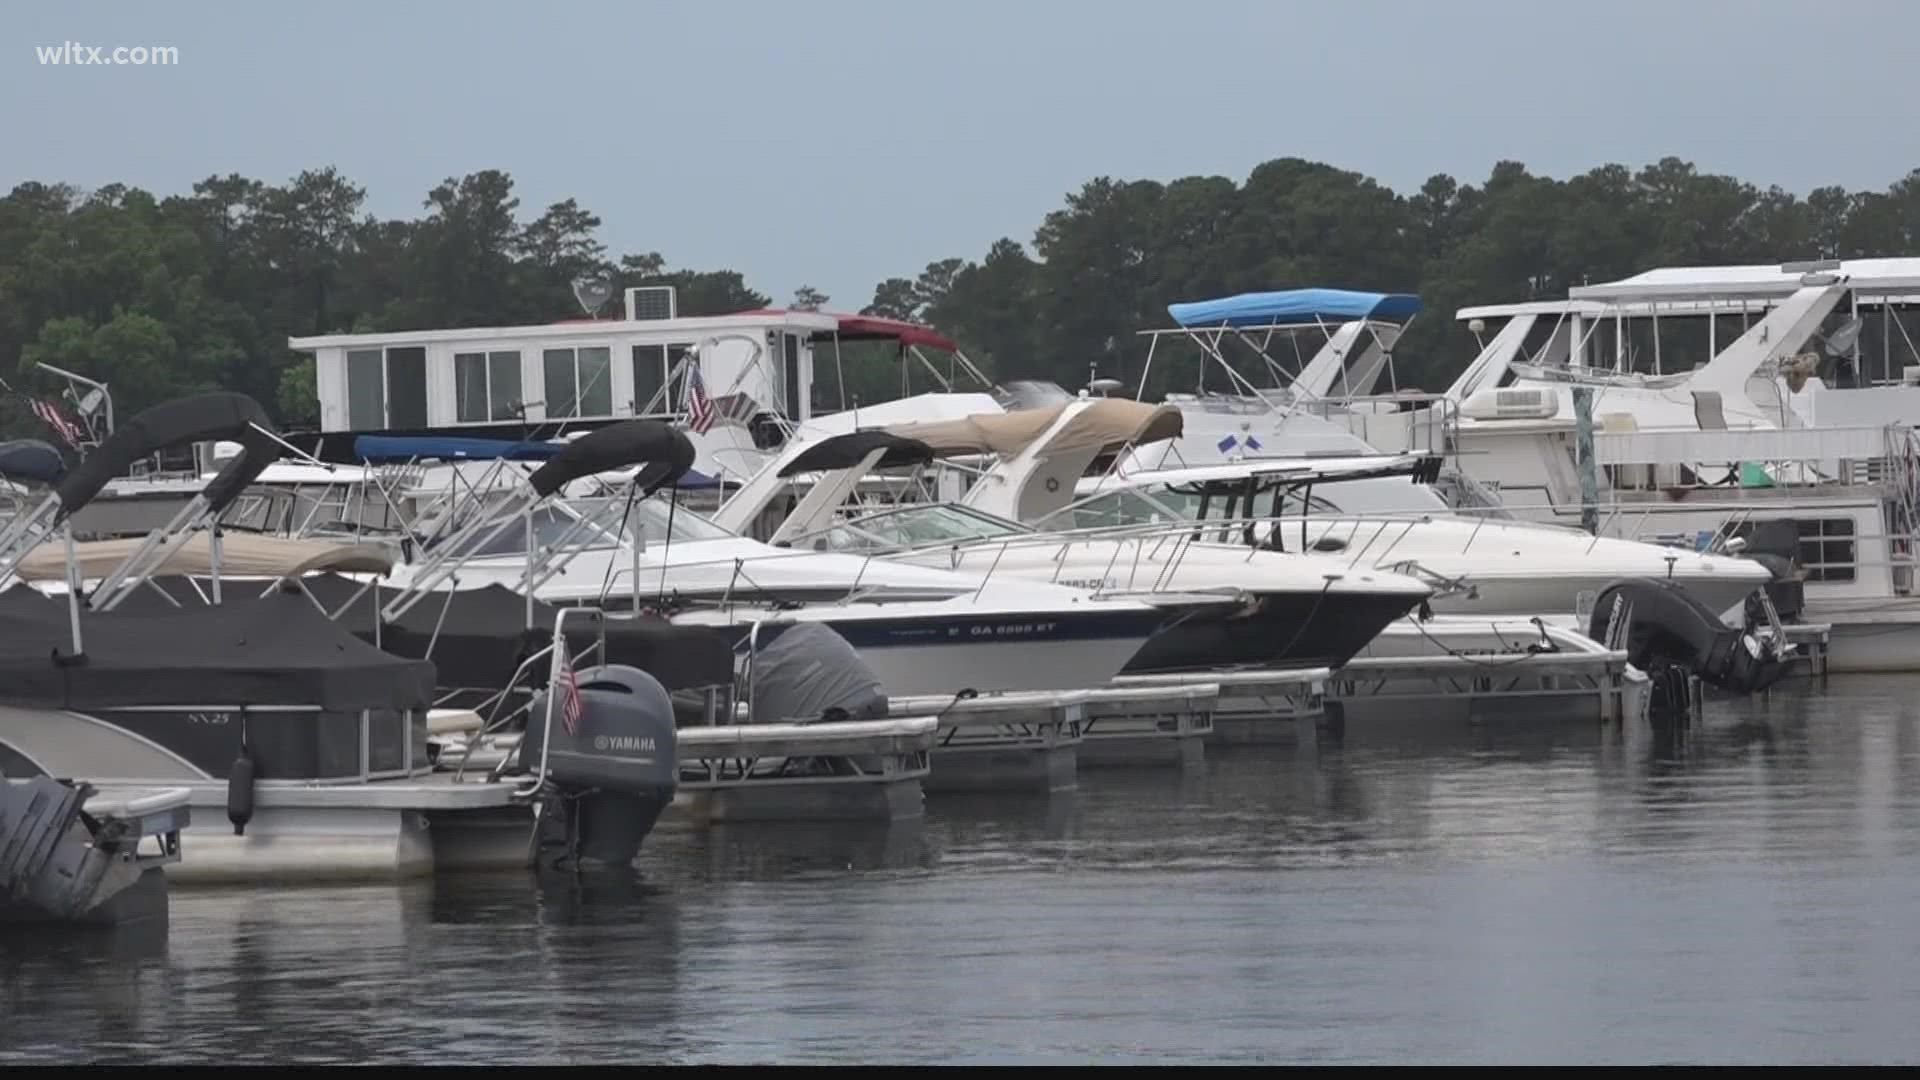 Don't have a boat, join a boat club.  At Lake Murray it's the Nautical Boat Club in Irmo.